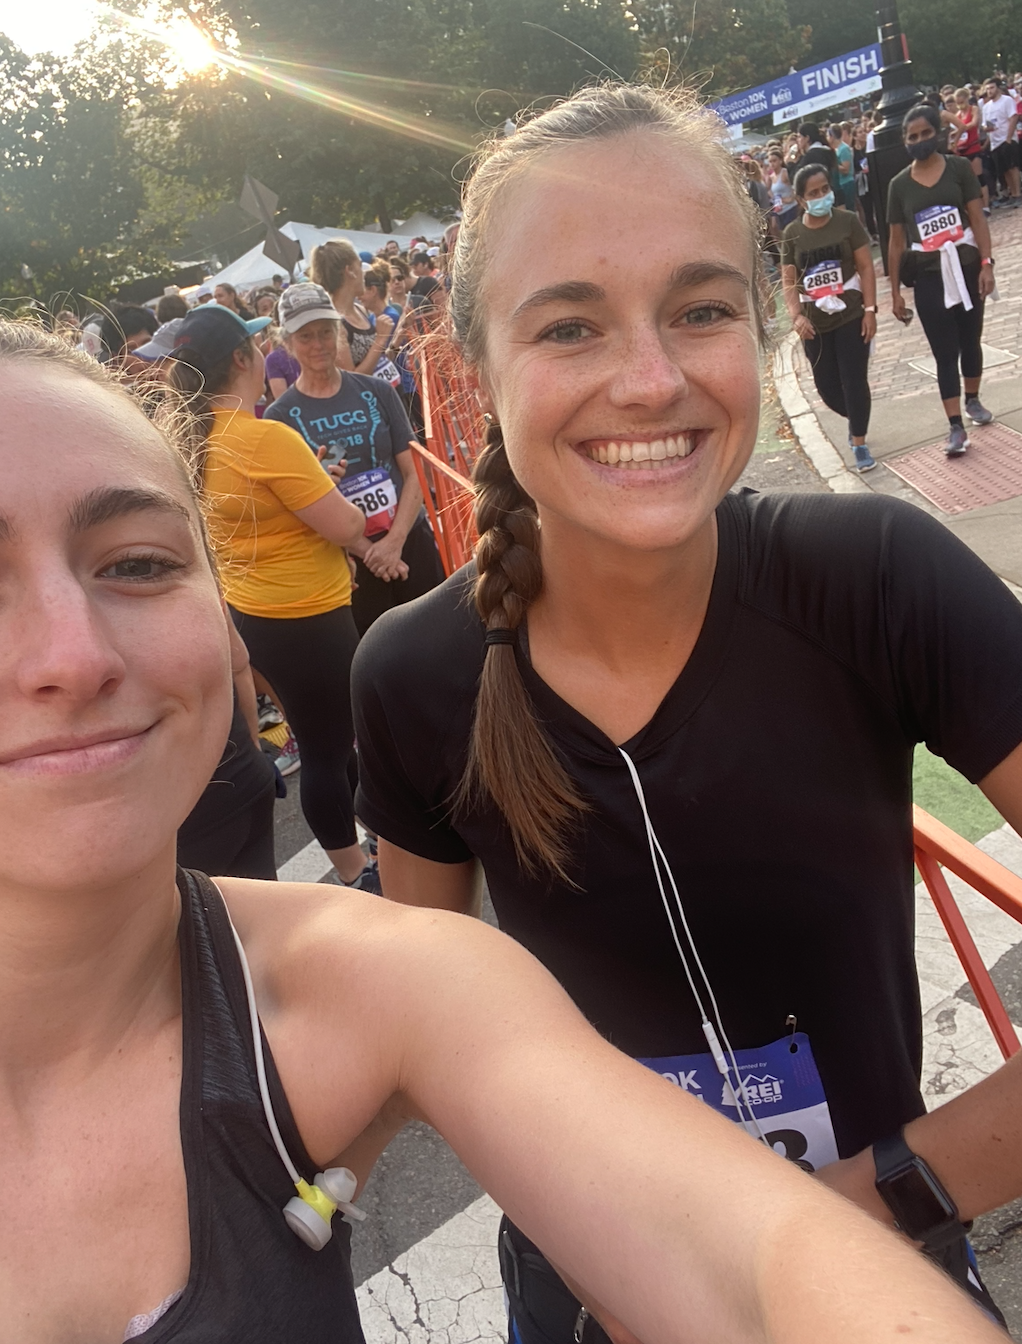 All smiles for women and running!